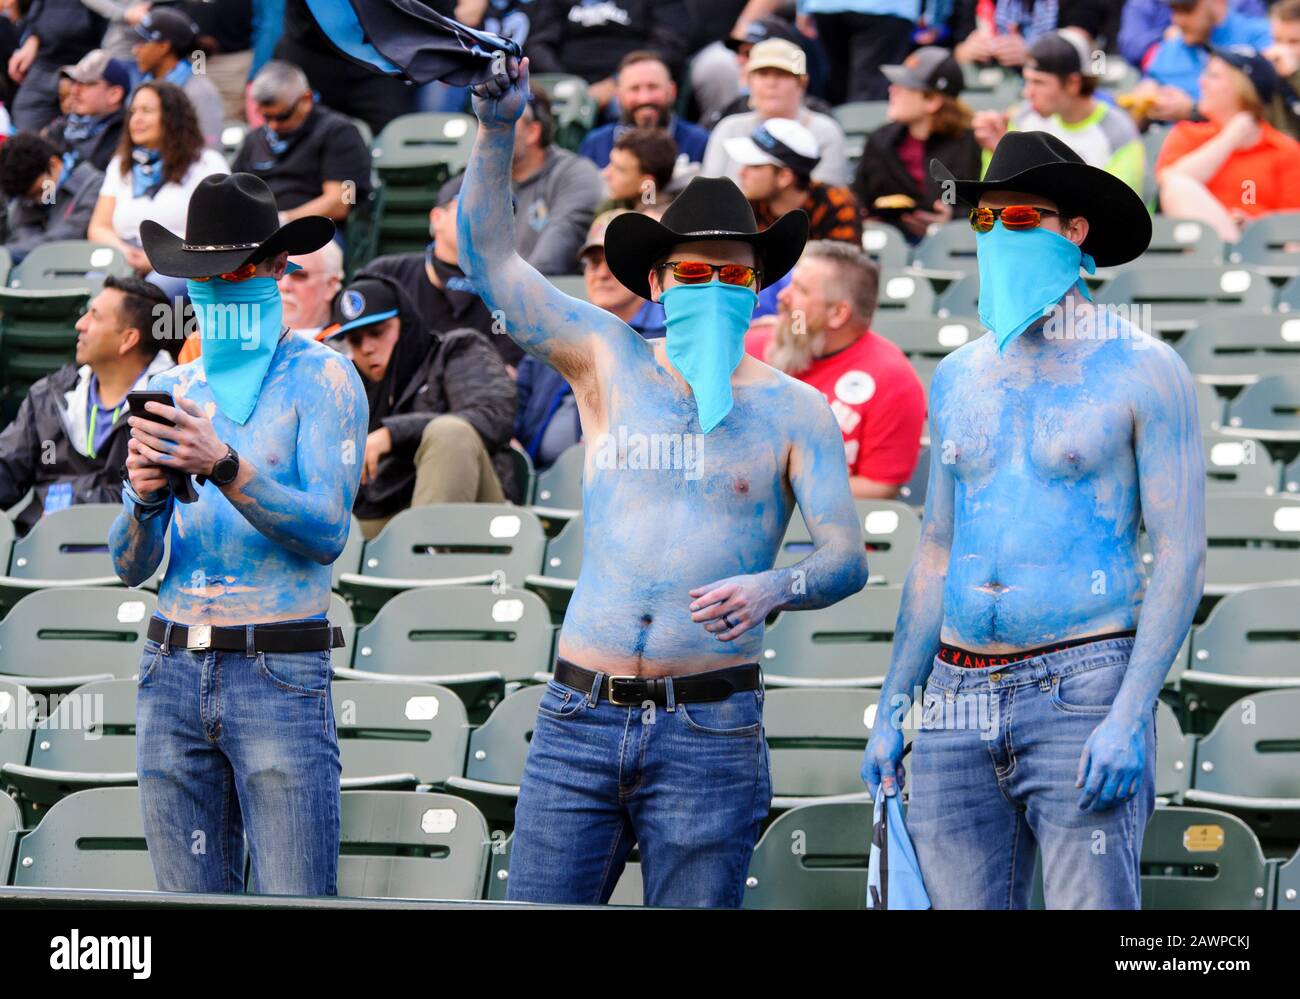 Arlington, Texas, USA. 9th Feb, 2020. Dallas Renegades fans during the 1st half of the XFL game between St. Louis Battlehawks and the Dallas Renegades at Globe Life Park in Arlington, Texas. Credit: Cal Sport Media/Alamy Live News Stock Photo